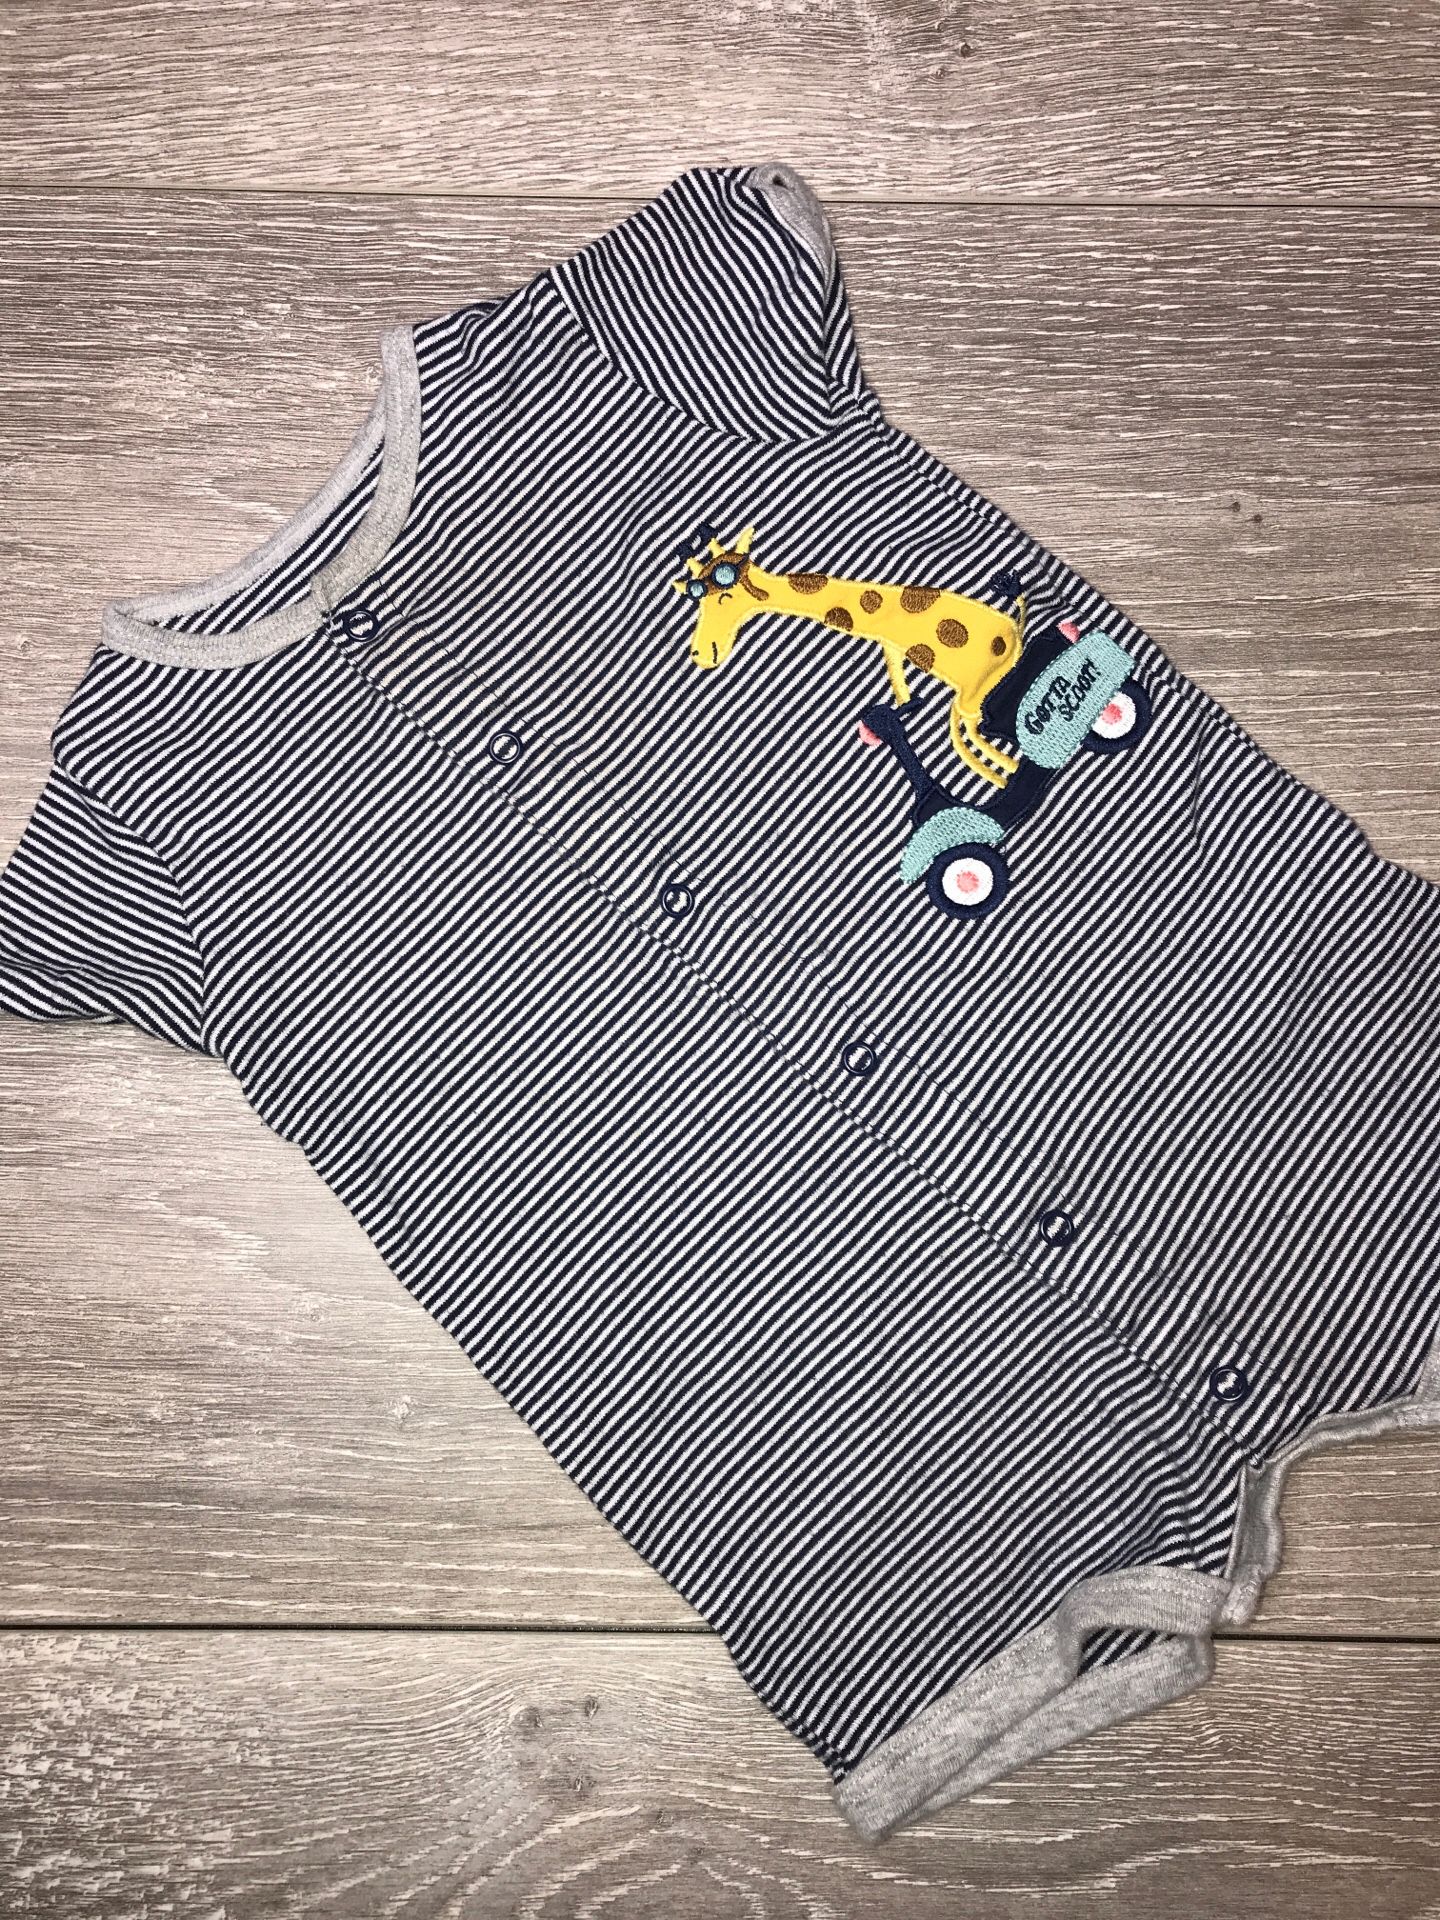 Baby Boy Clothing Carter’s 9 Months $2